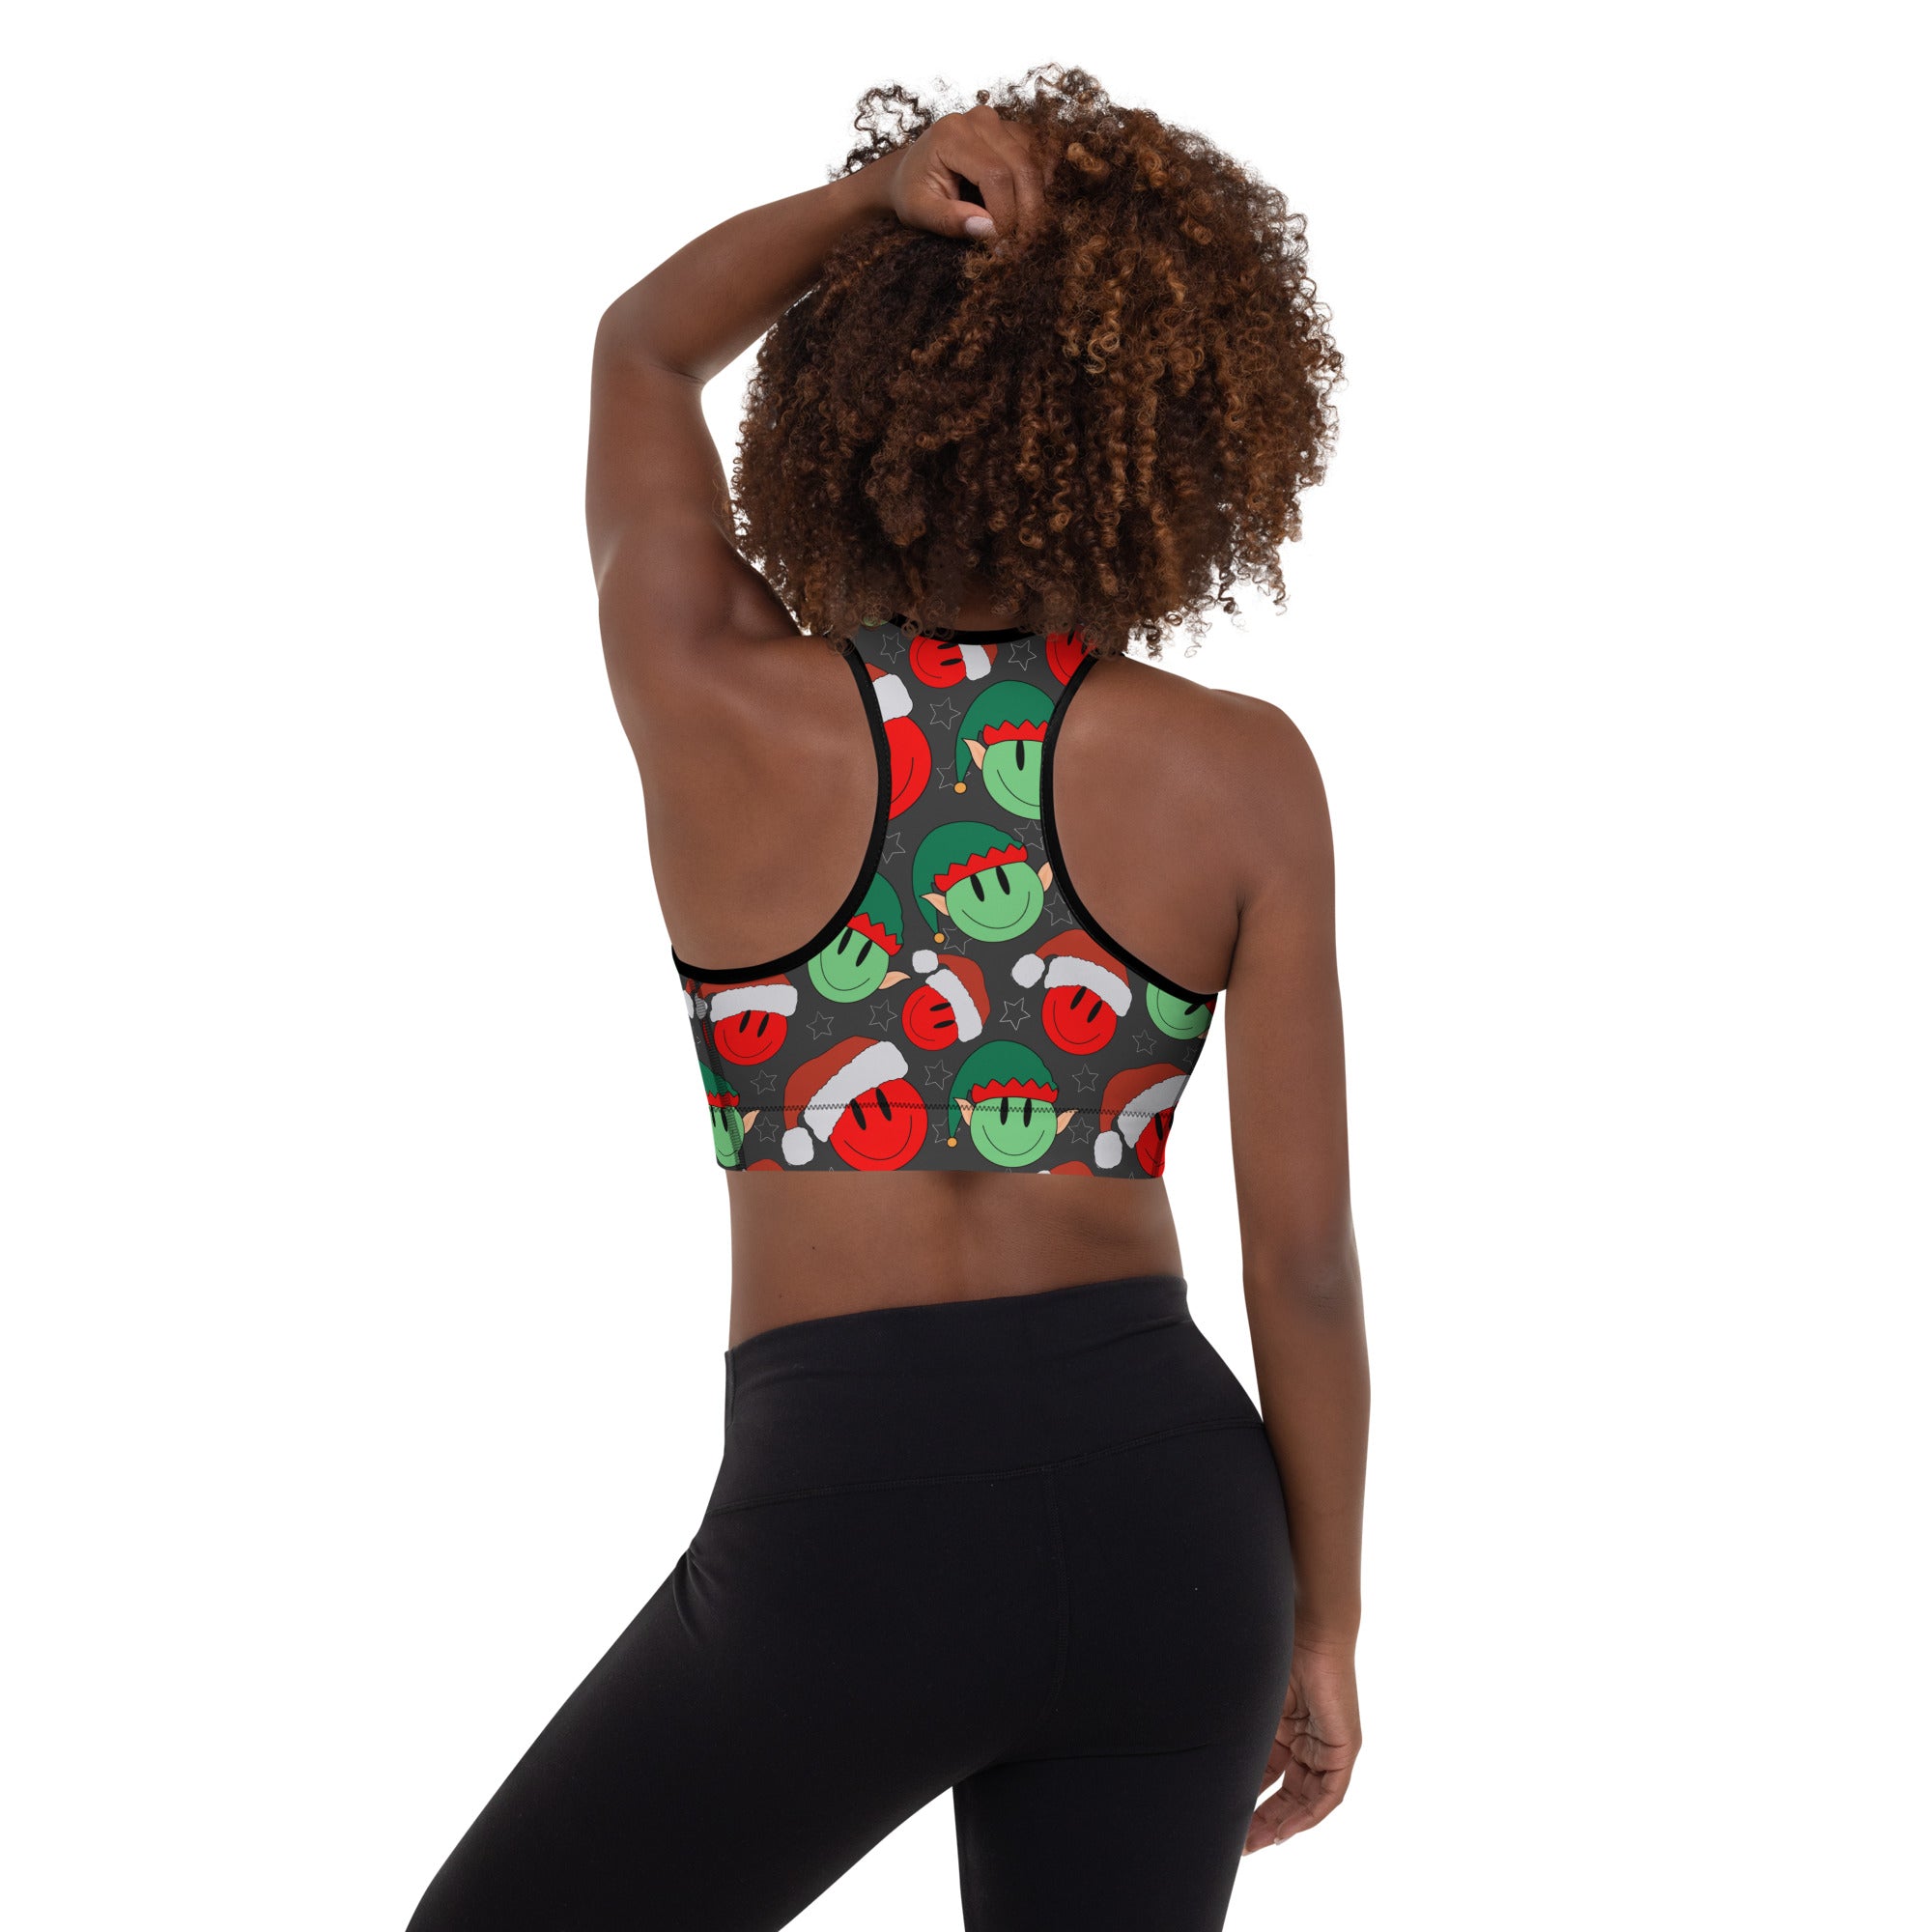 Elves And Smiley Faces Padded Sports Bra